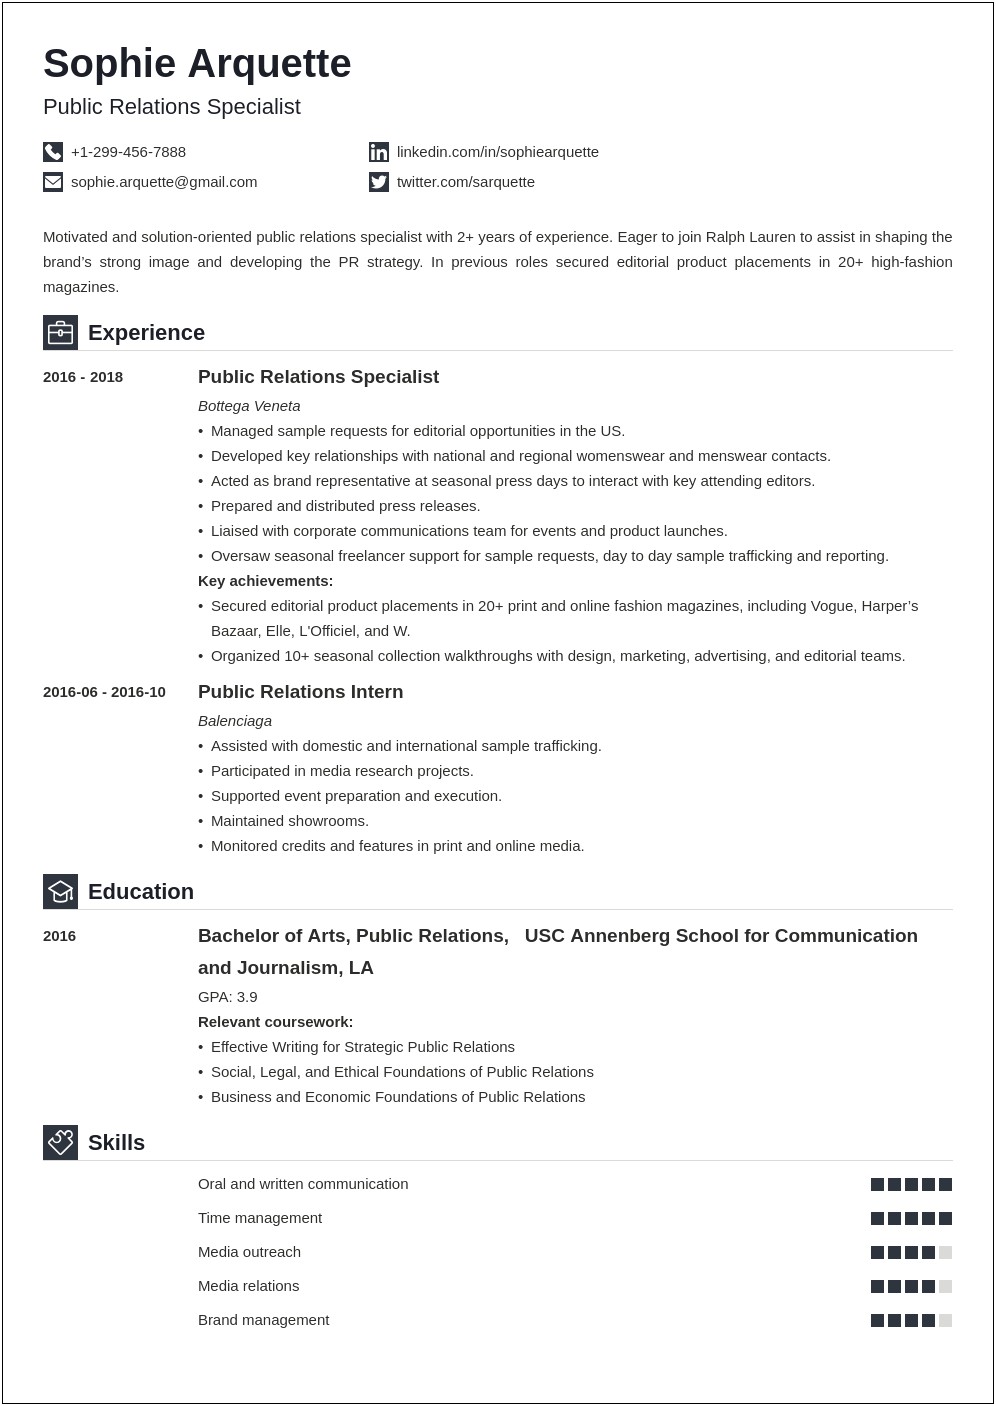 Public Relations Student Resume Objective